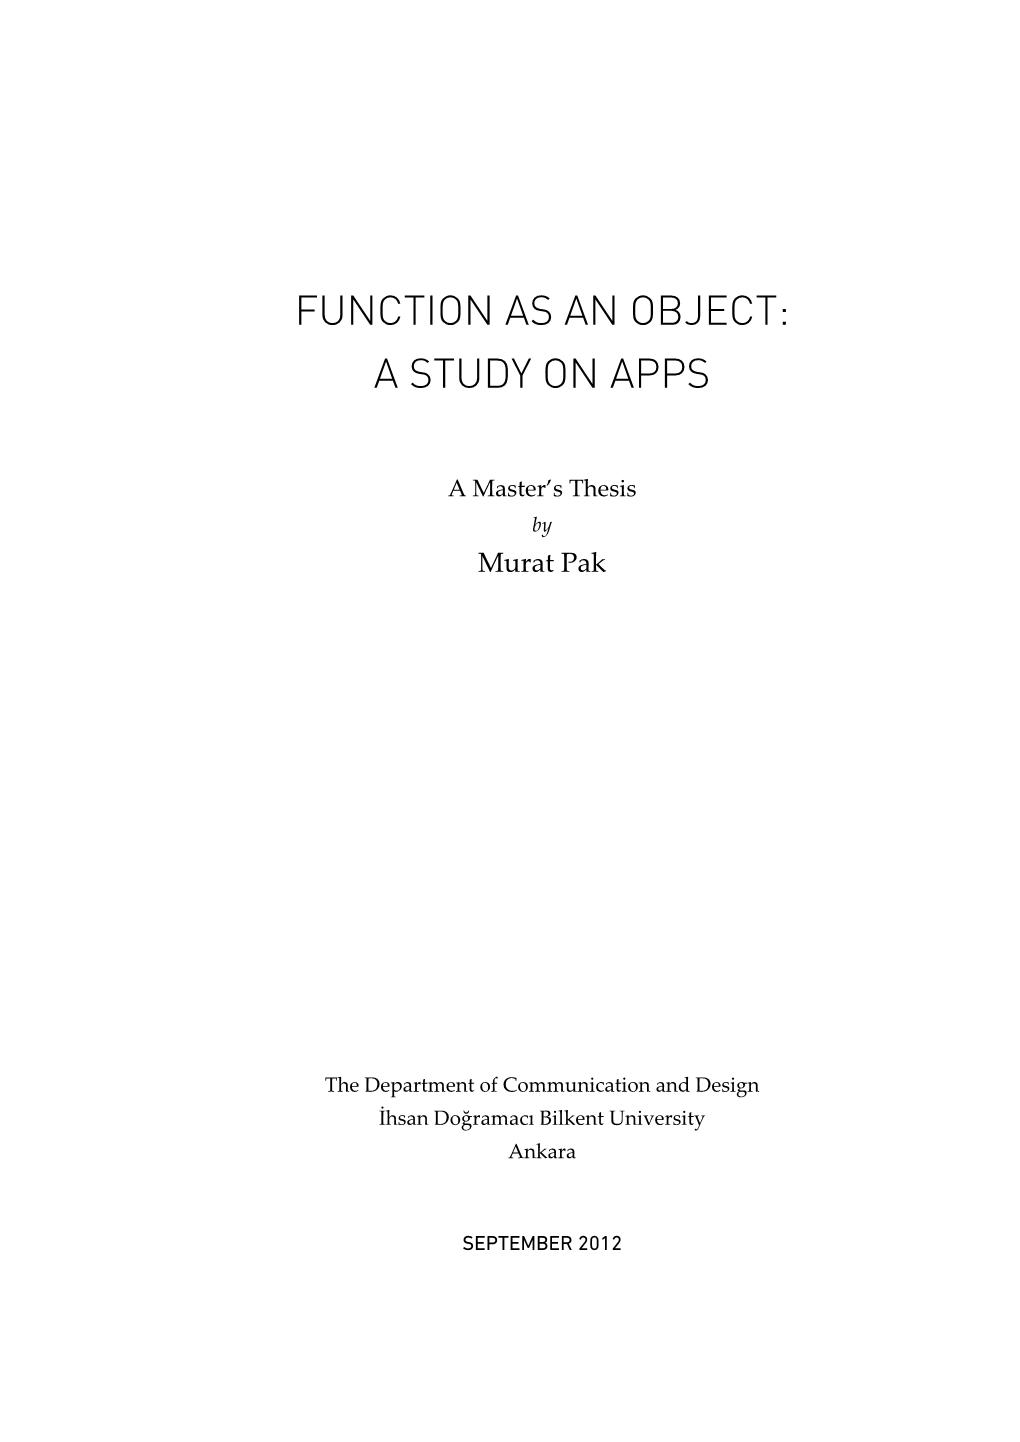 Function As an Object: a Study on Apps